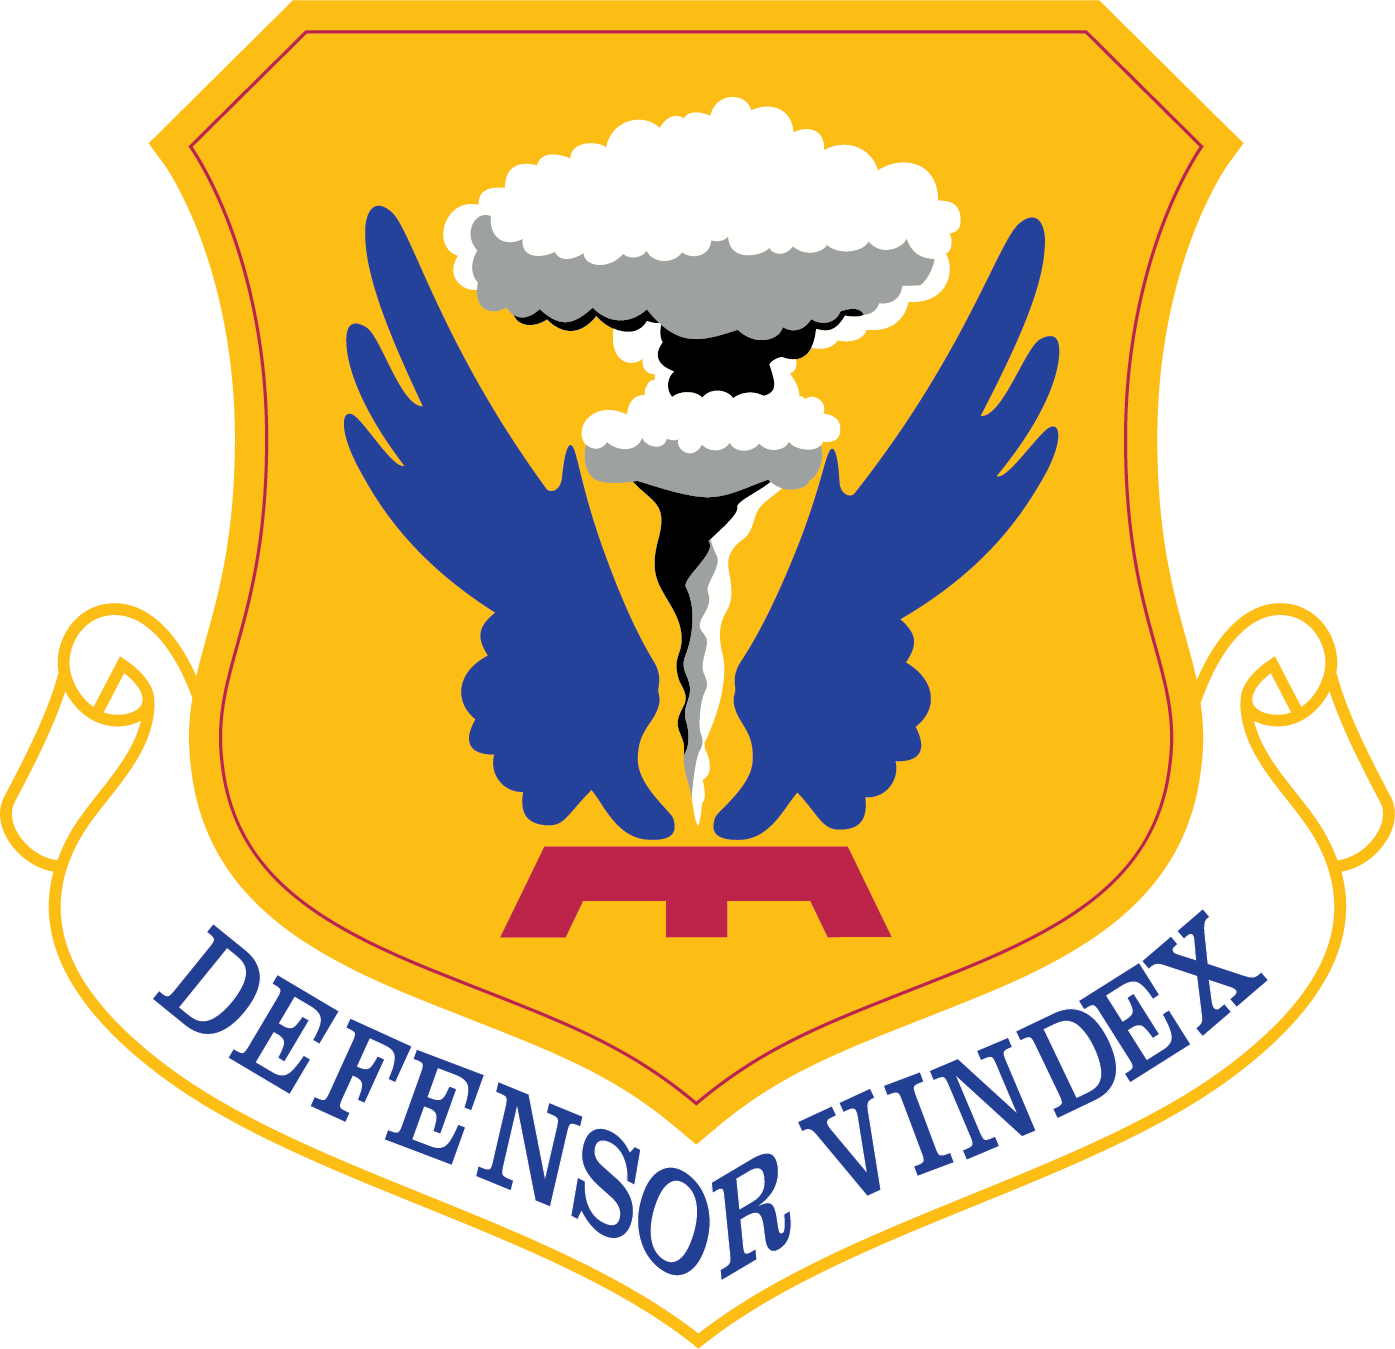 509th Bombardment Wing